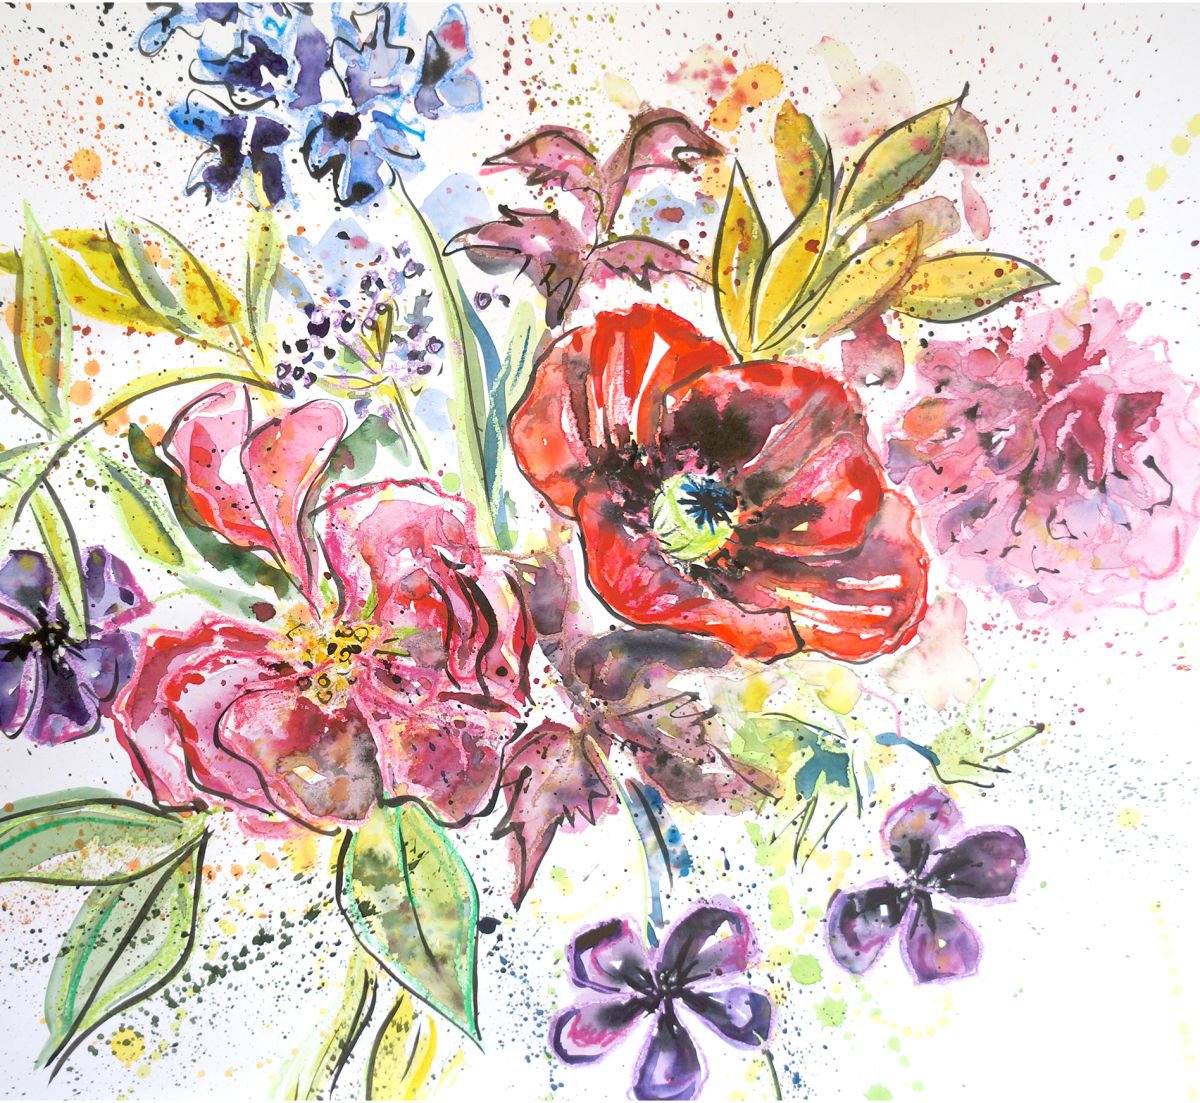 Flowers from the garden by Julia Rigby